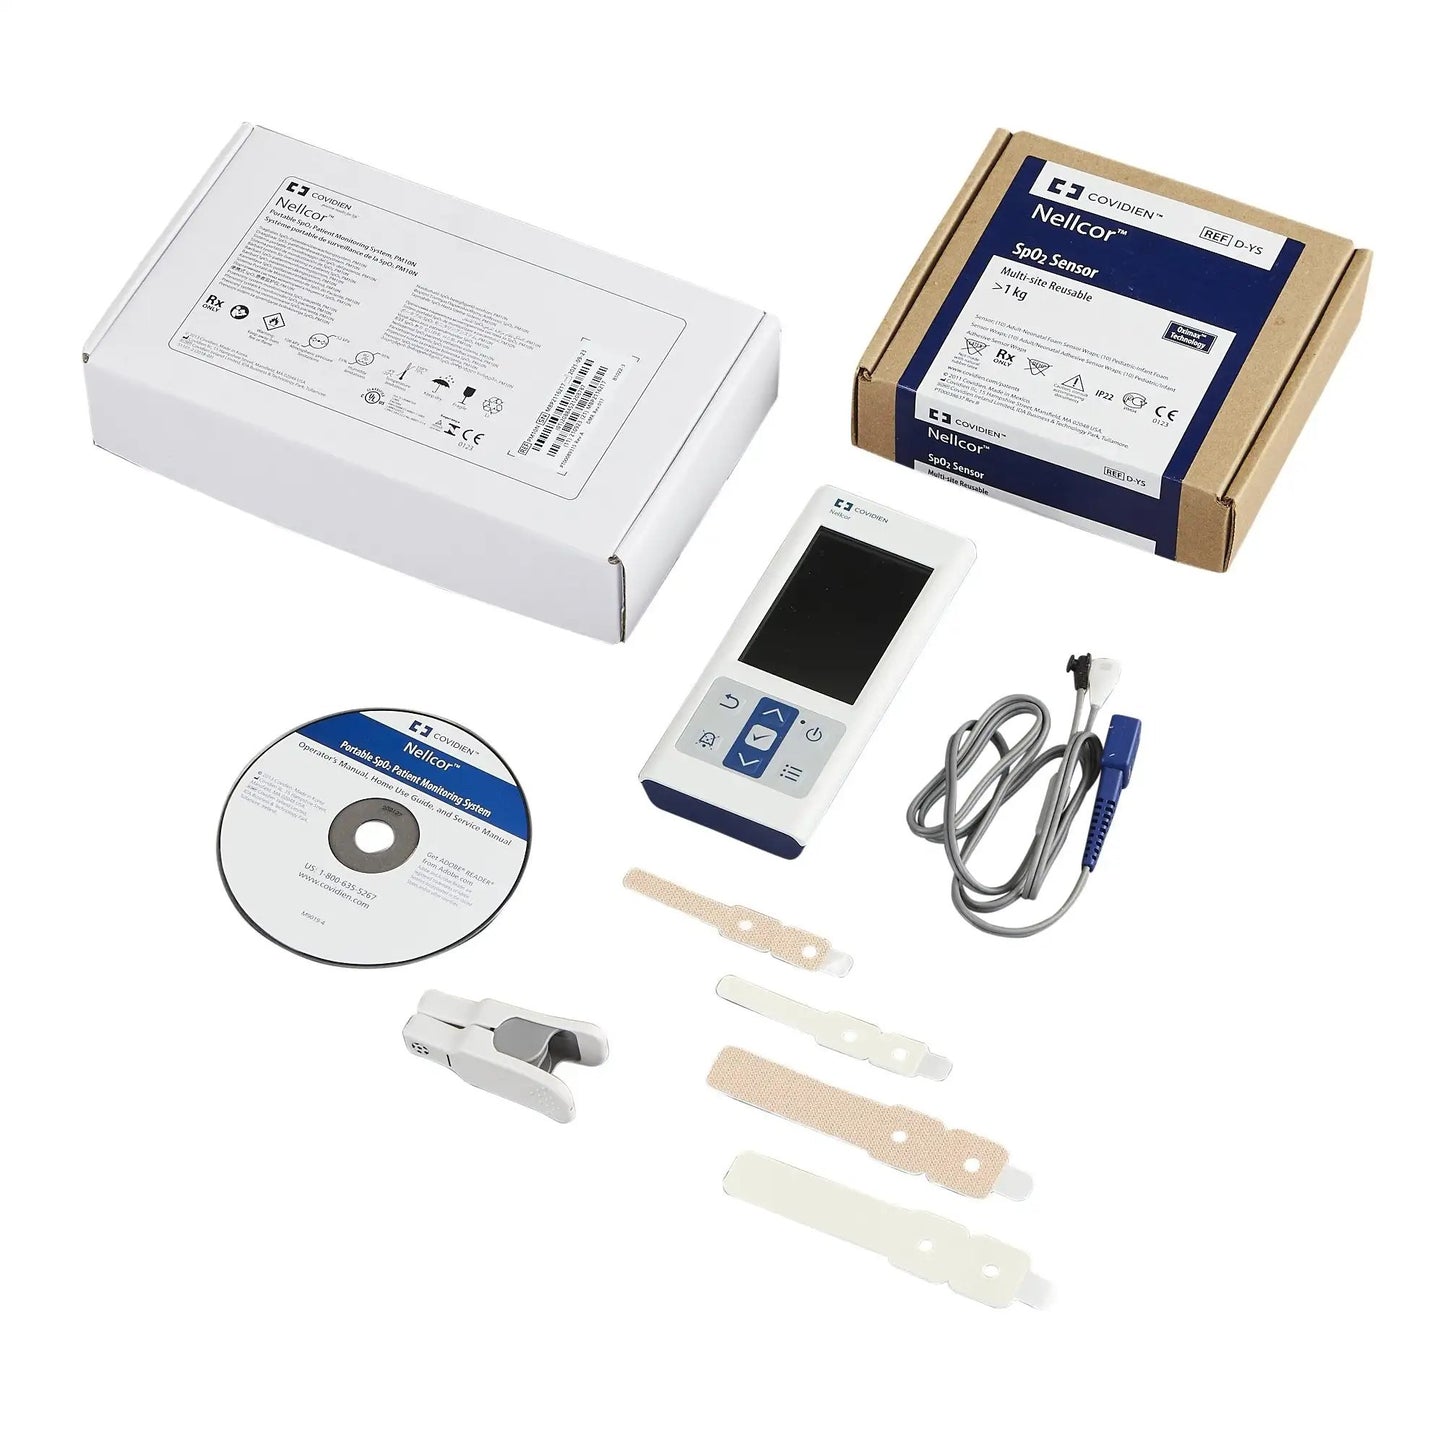 Nellcor Portable SpO2 Patient Monitoring System with Adult and Pediatric Sensor